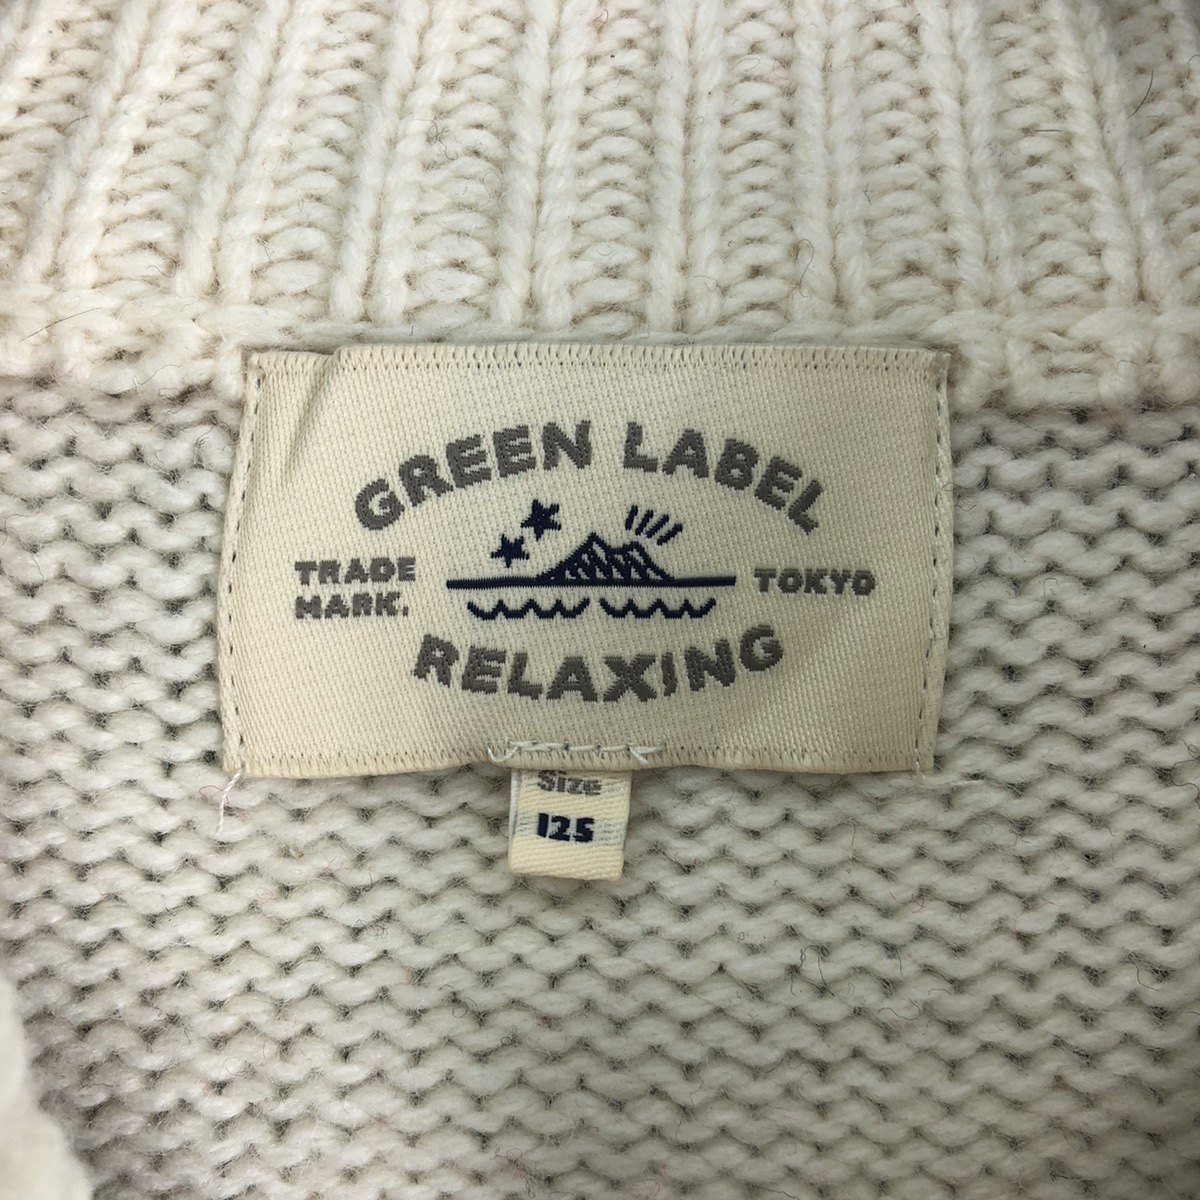 Coloured Cable Knit Sweater - Green Label Knit Cowichan Shawl Collar for Kid - 8